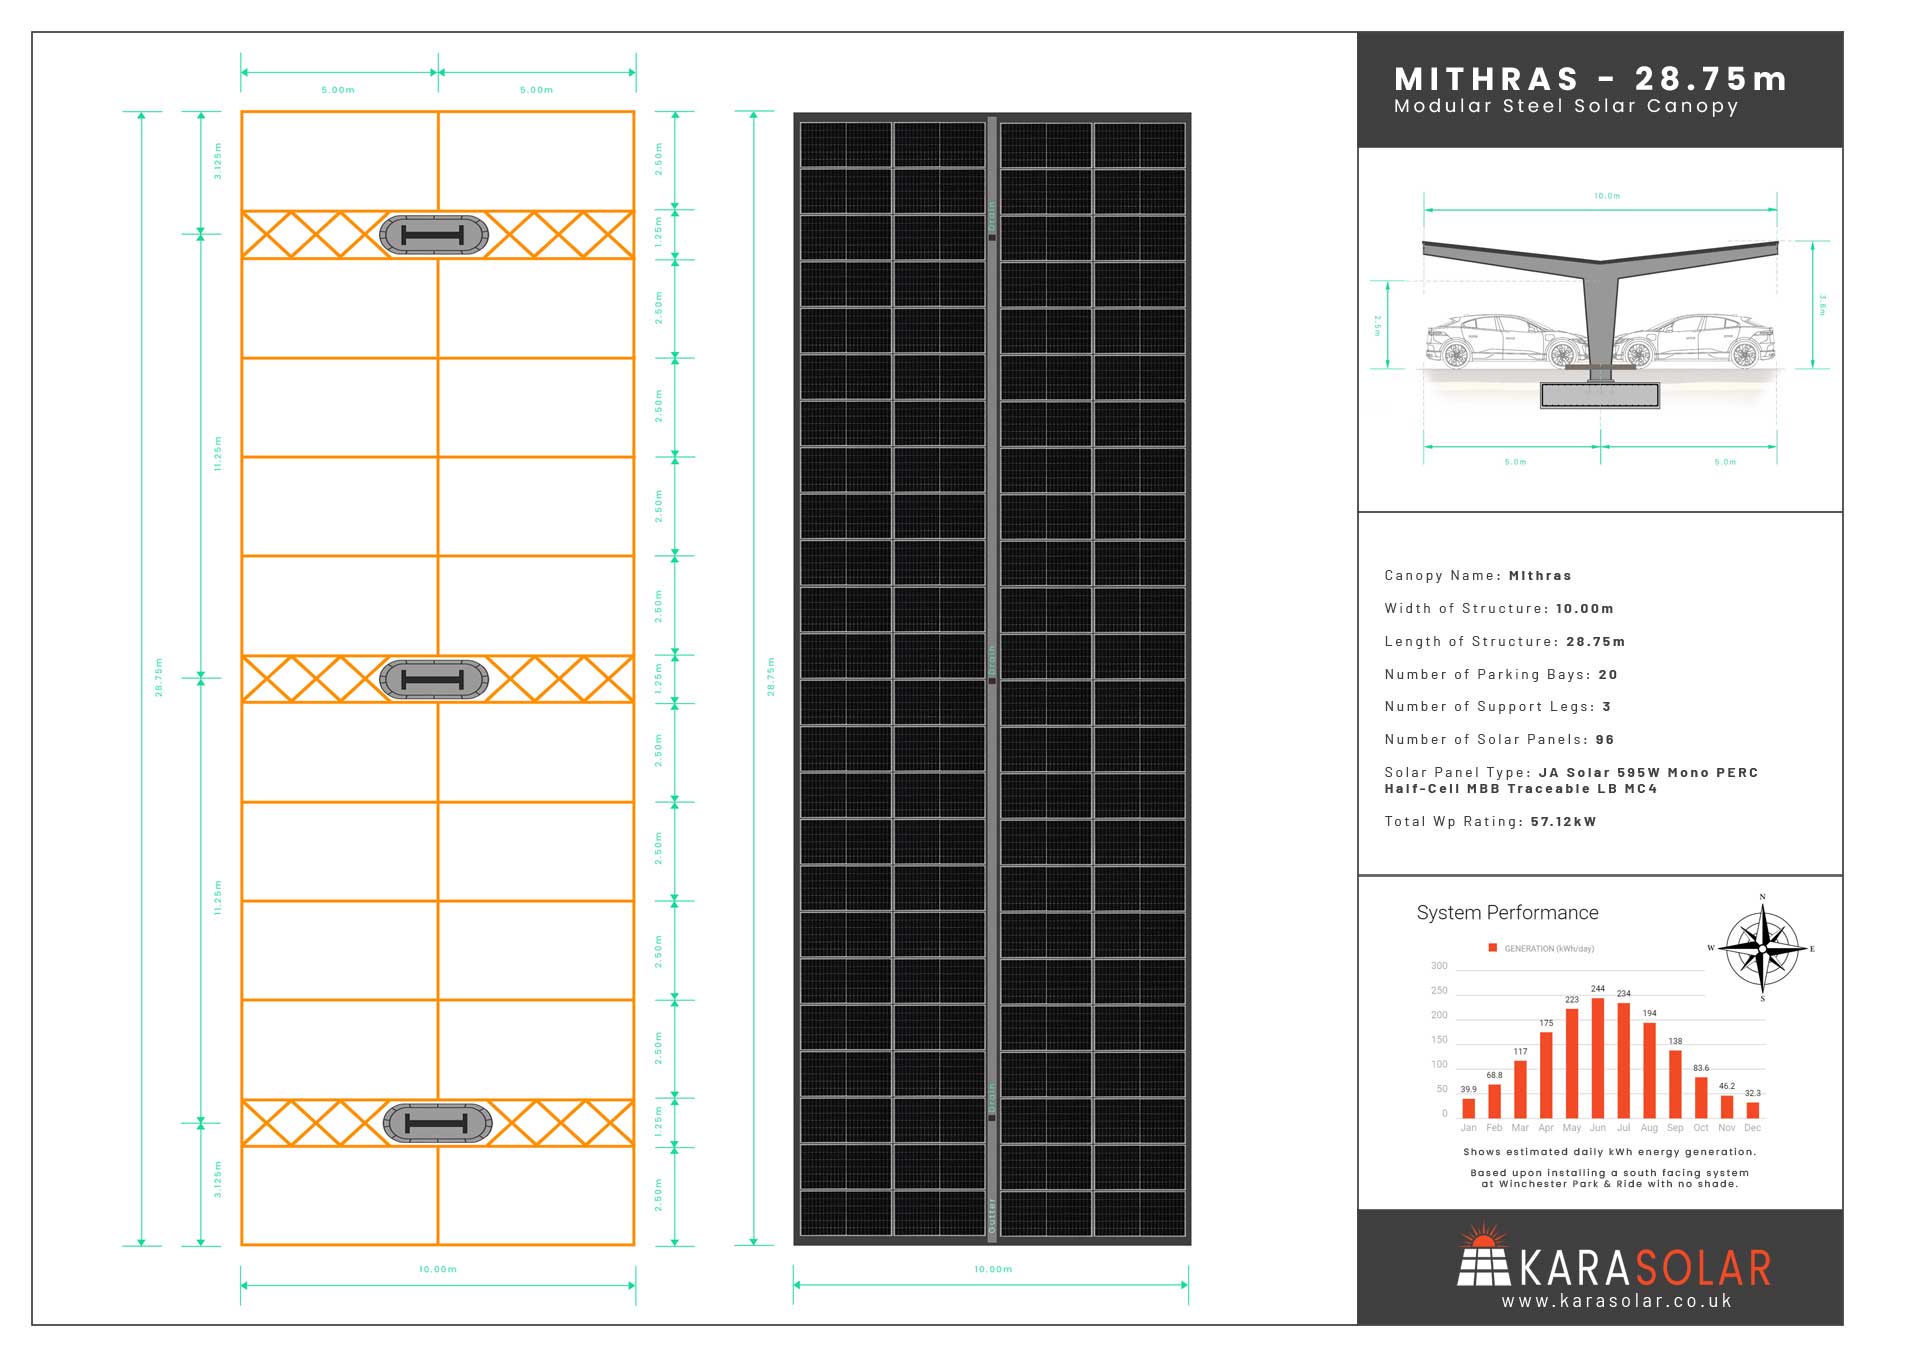 Mithras-Steel-Solar-Canopy-Parking-Layout-28.75m-Doc